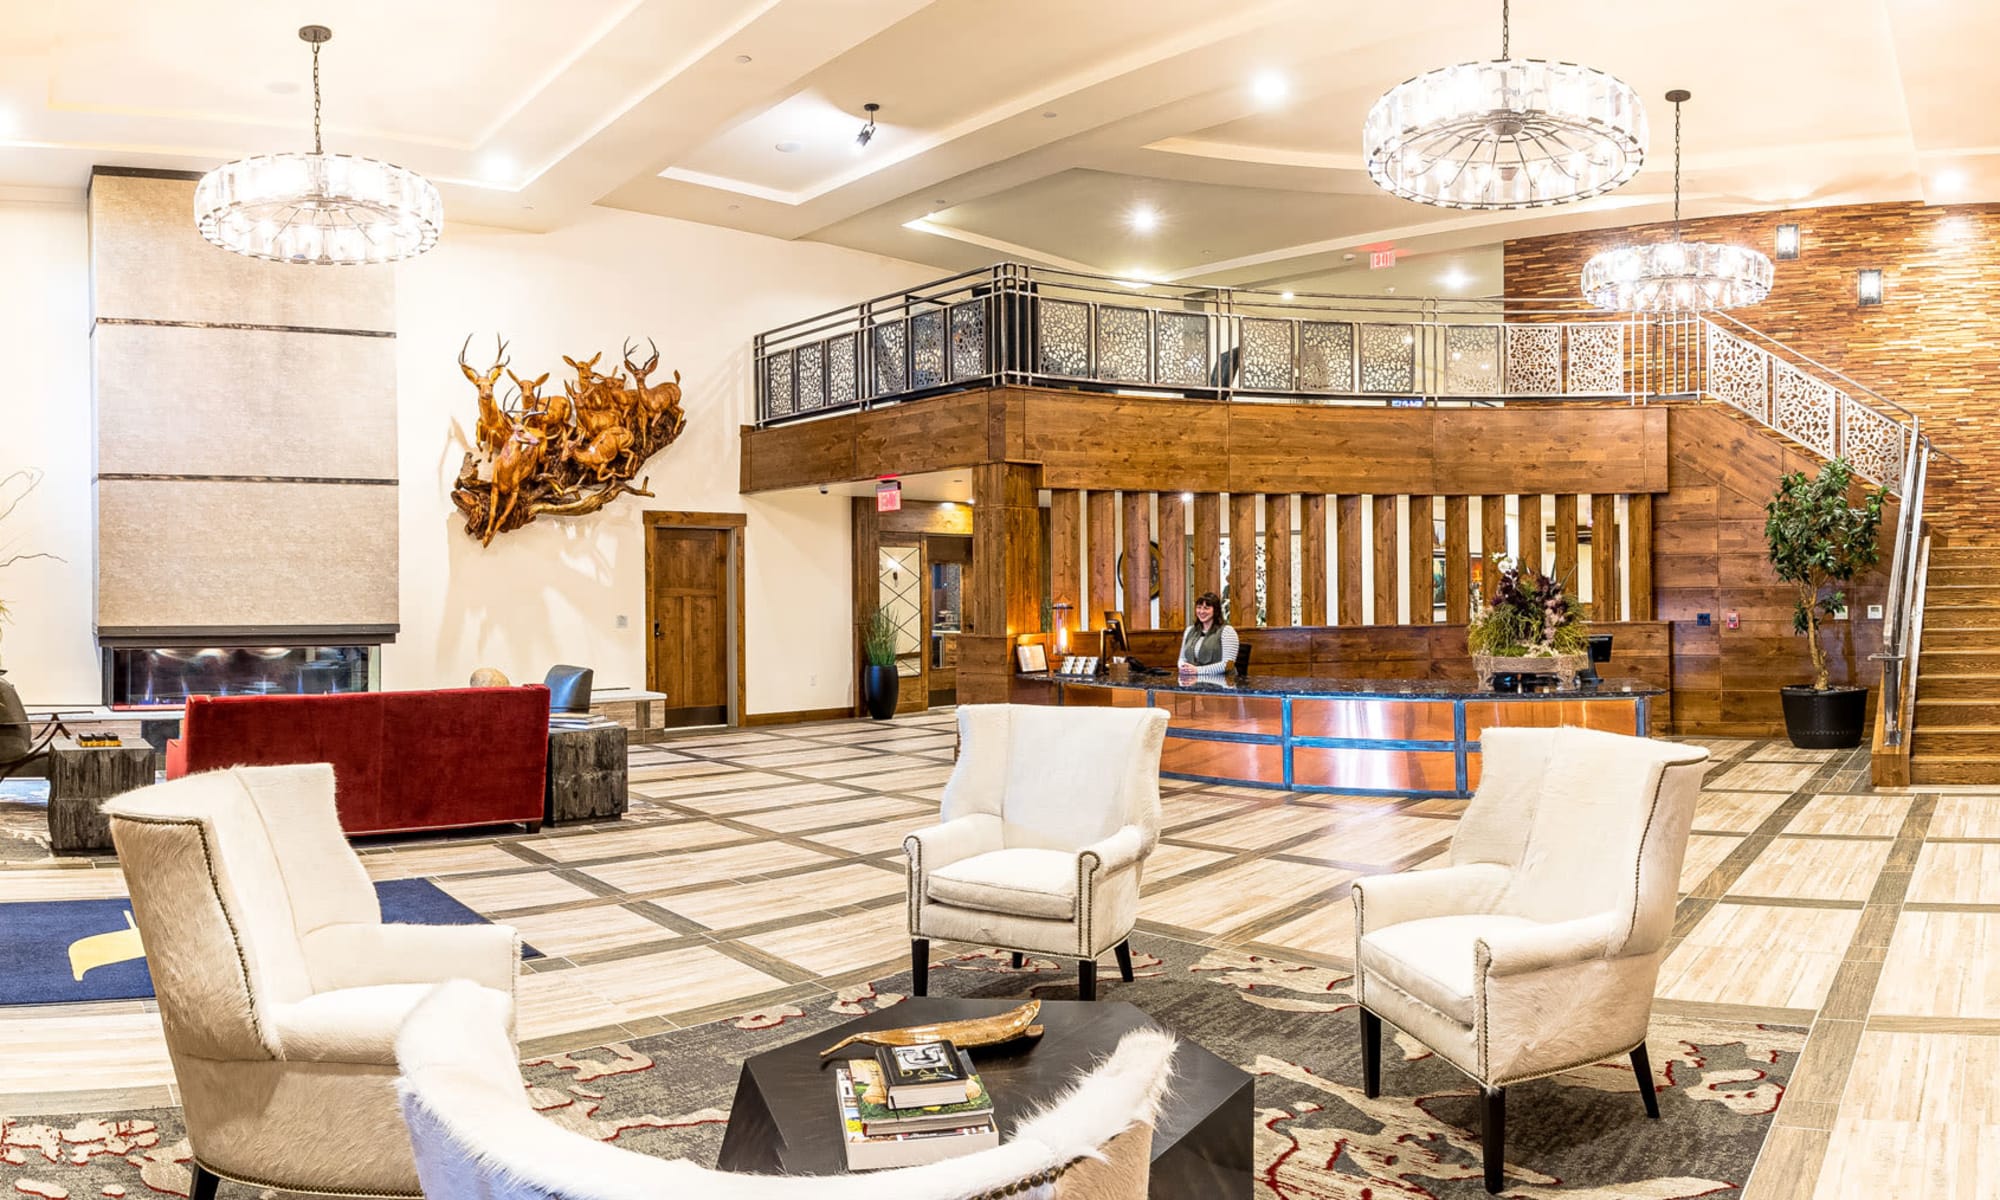 Reception and lounge area at Touchmark at Pilot Butte in Bend, Oregon